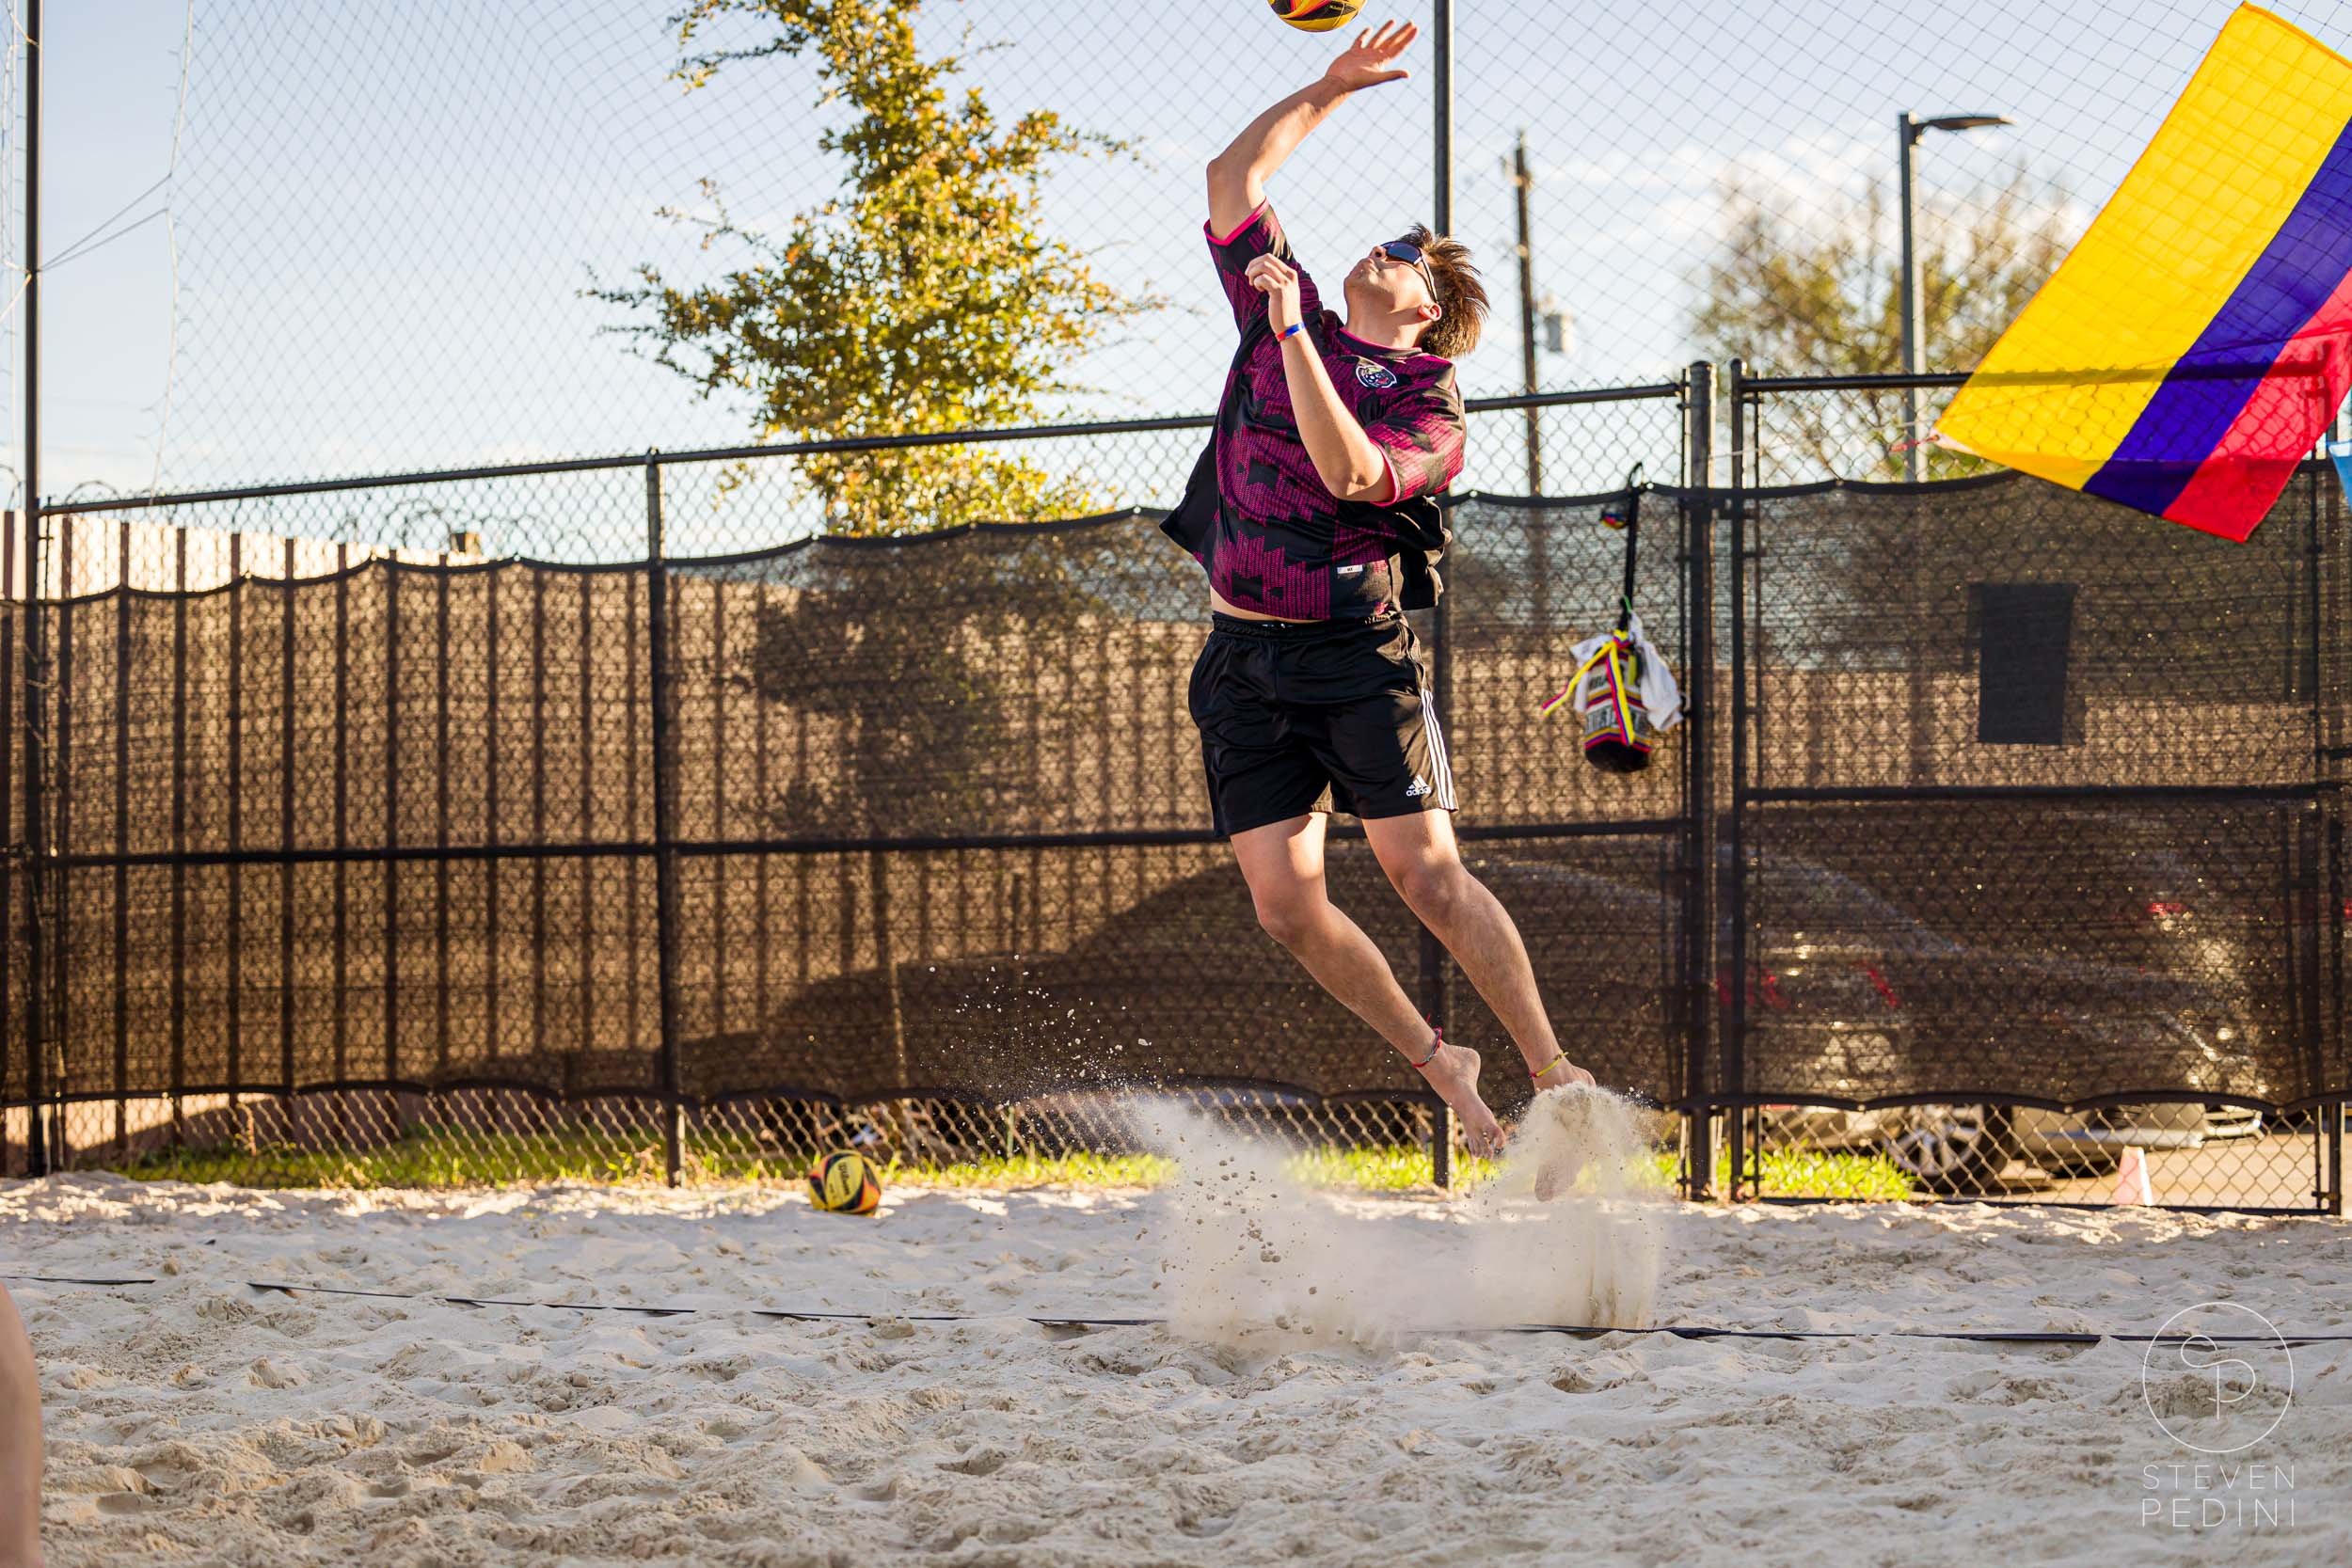 Steven Pedini Photography - Bumpy Pickle - Sand Volleyball - Houston TX - World Cup of Volleyball - 00131.jpg